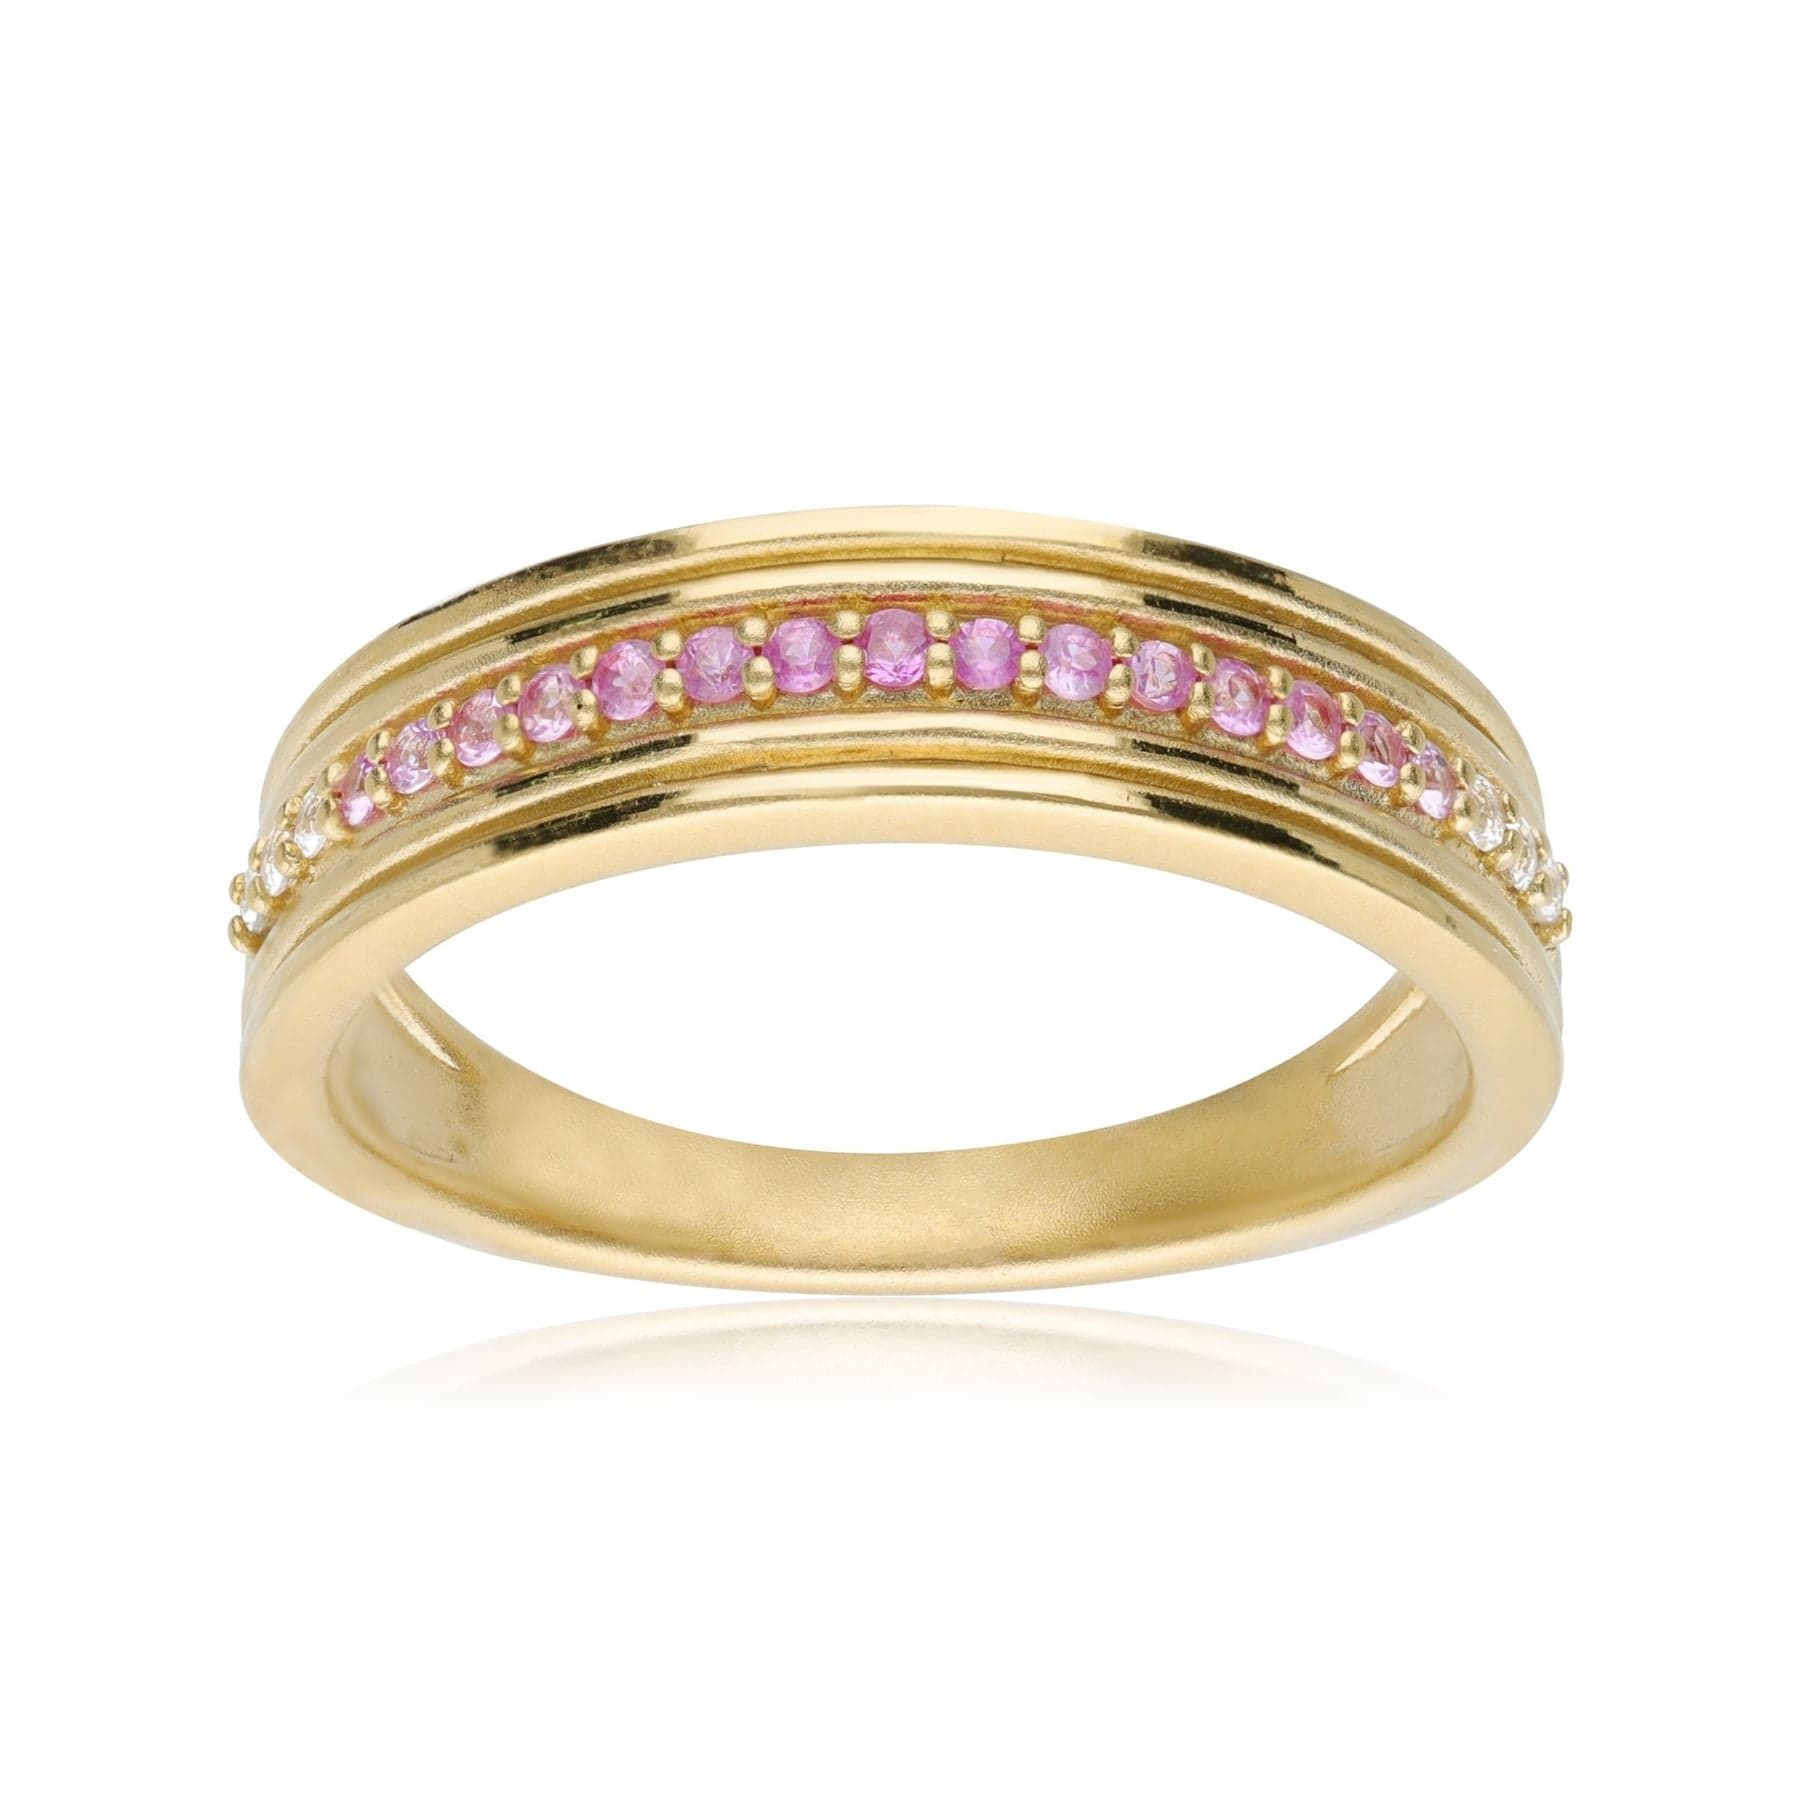 Caruso Pink & White Sapphire Gradient Ring In 9ct Yellow Gold - Gemondo